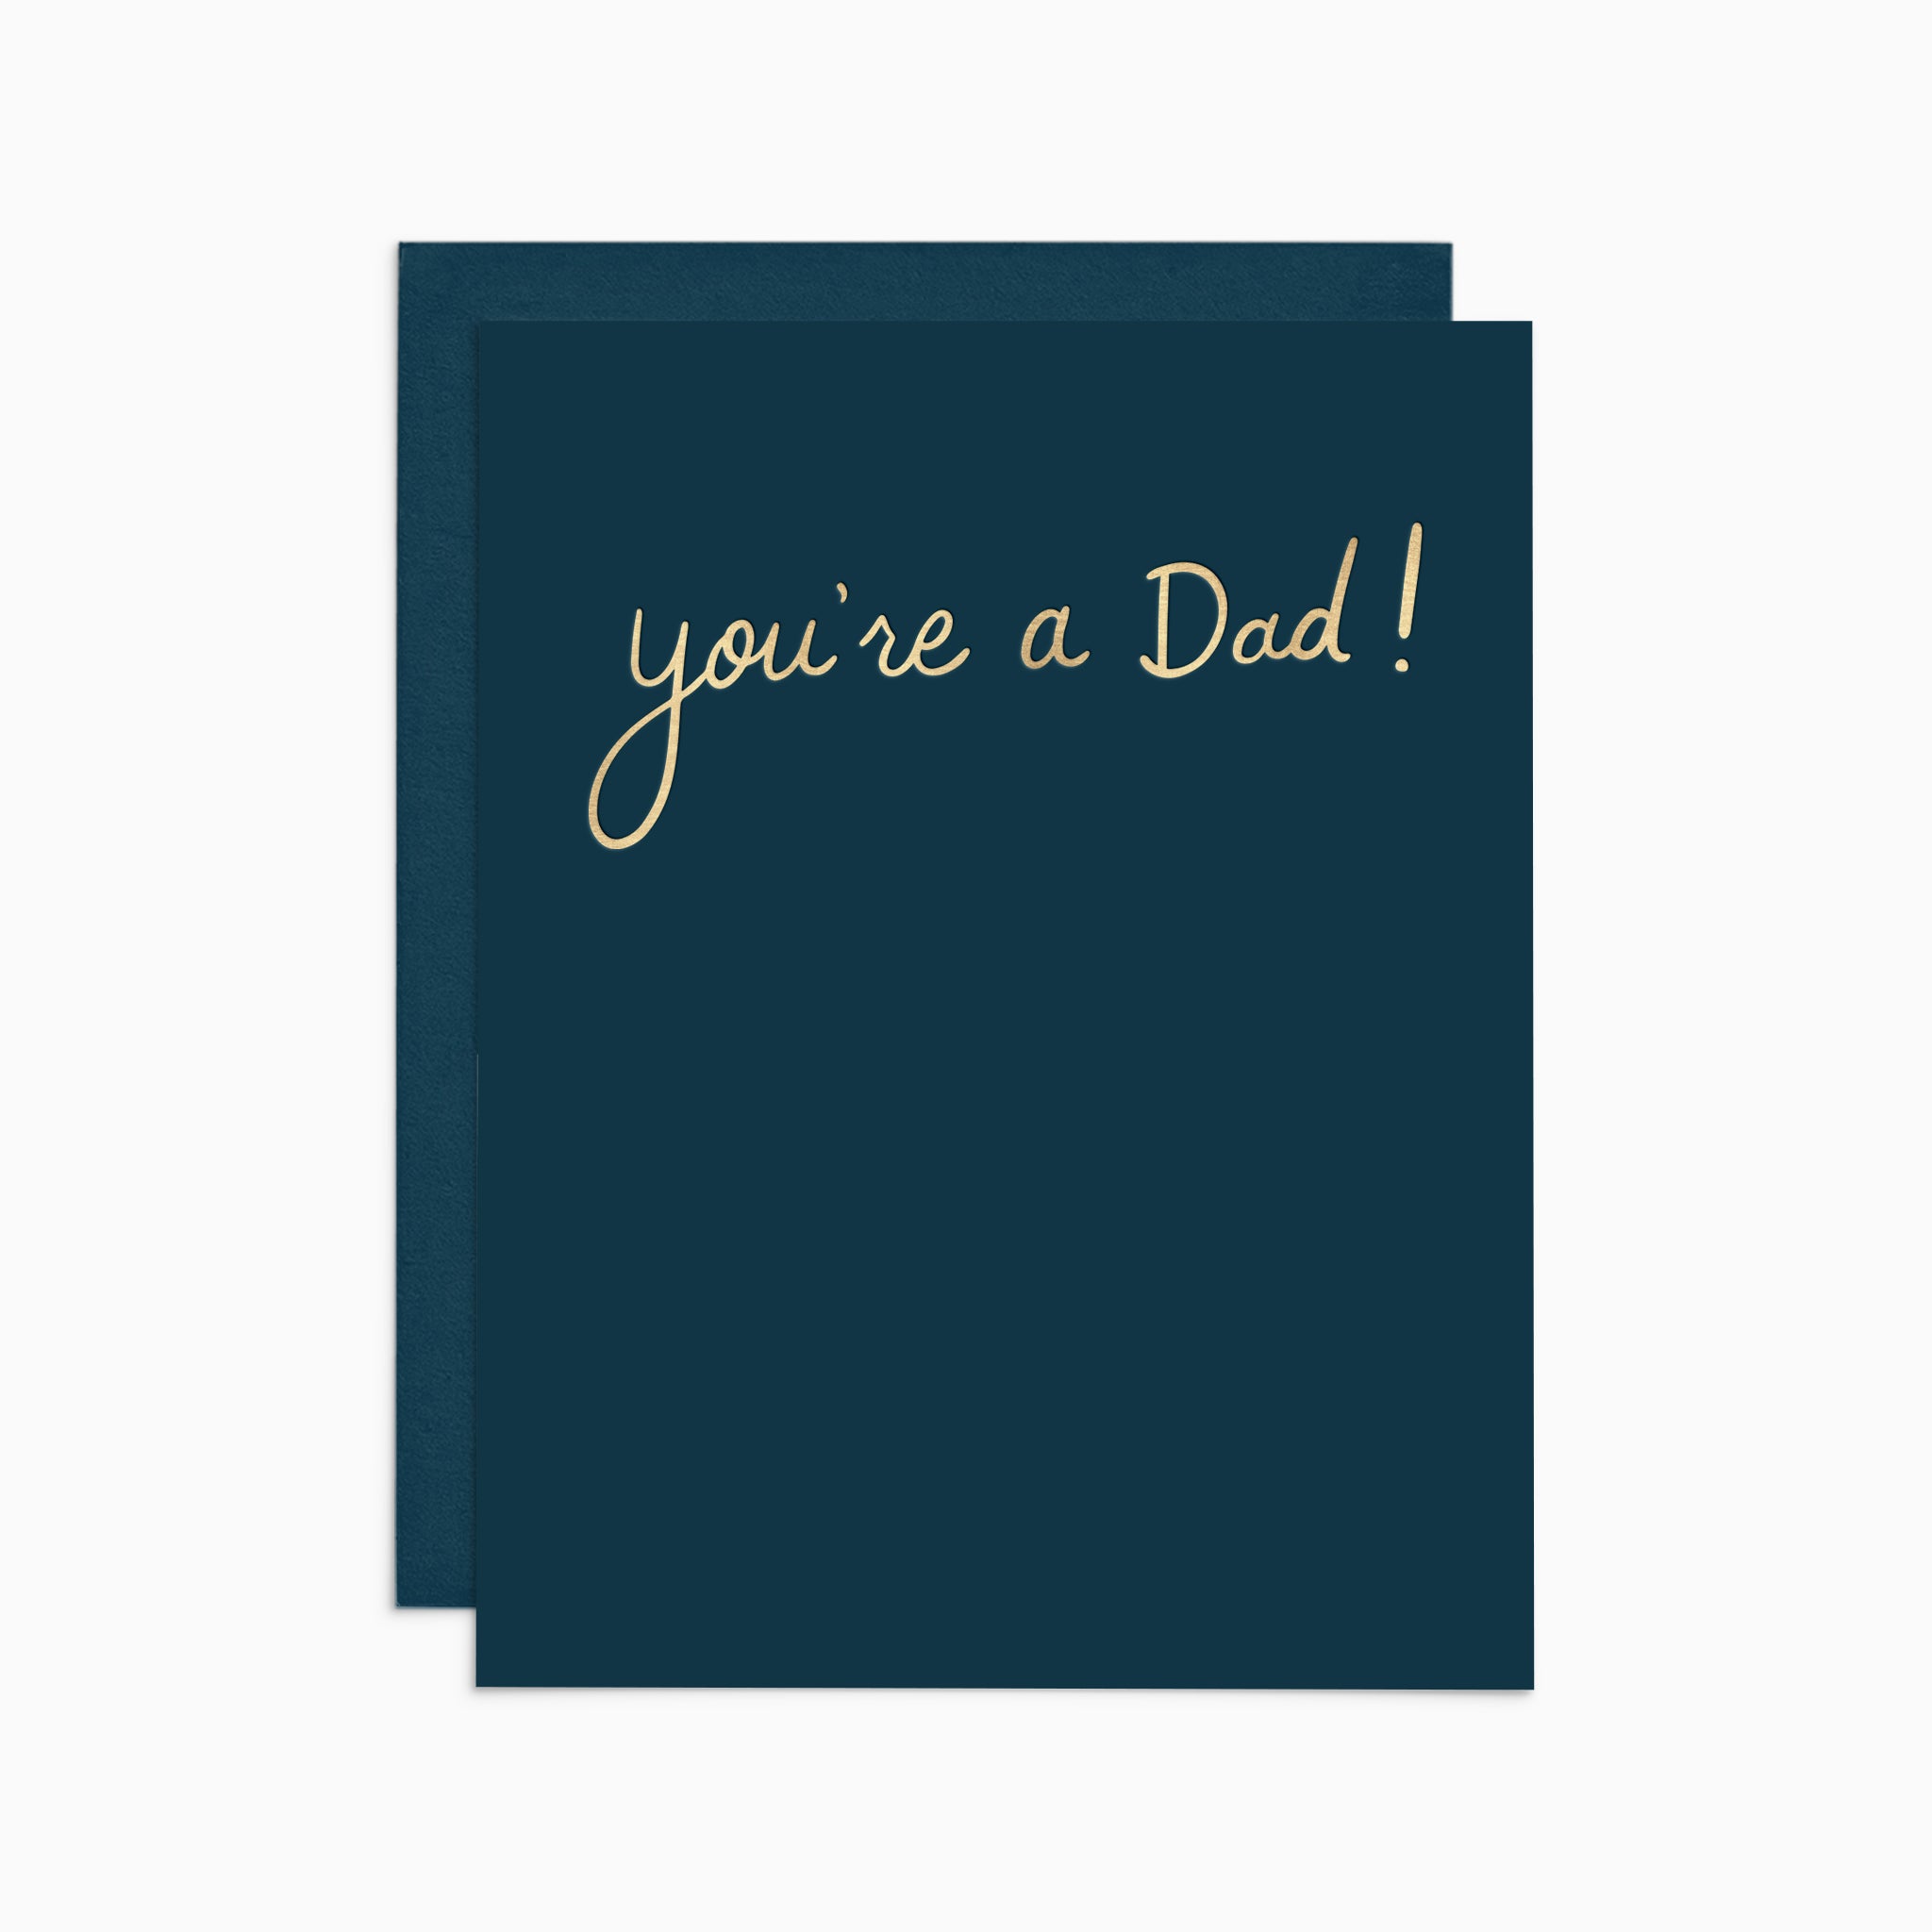 You're a Dad! Card